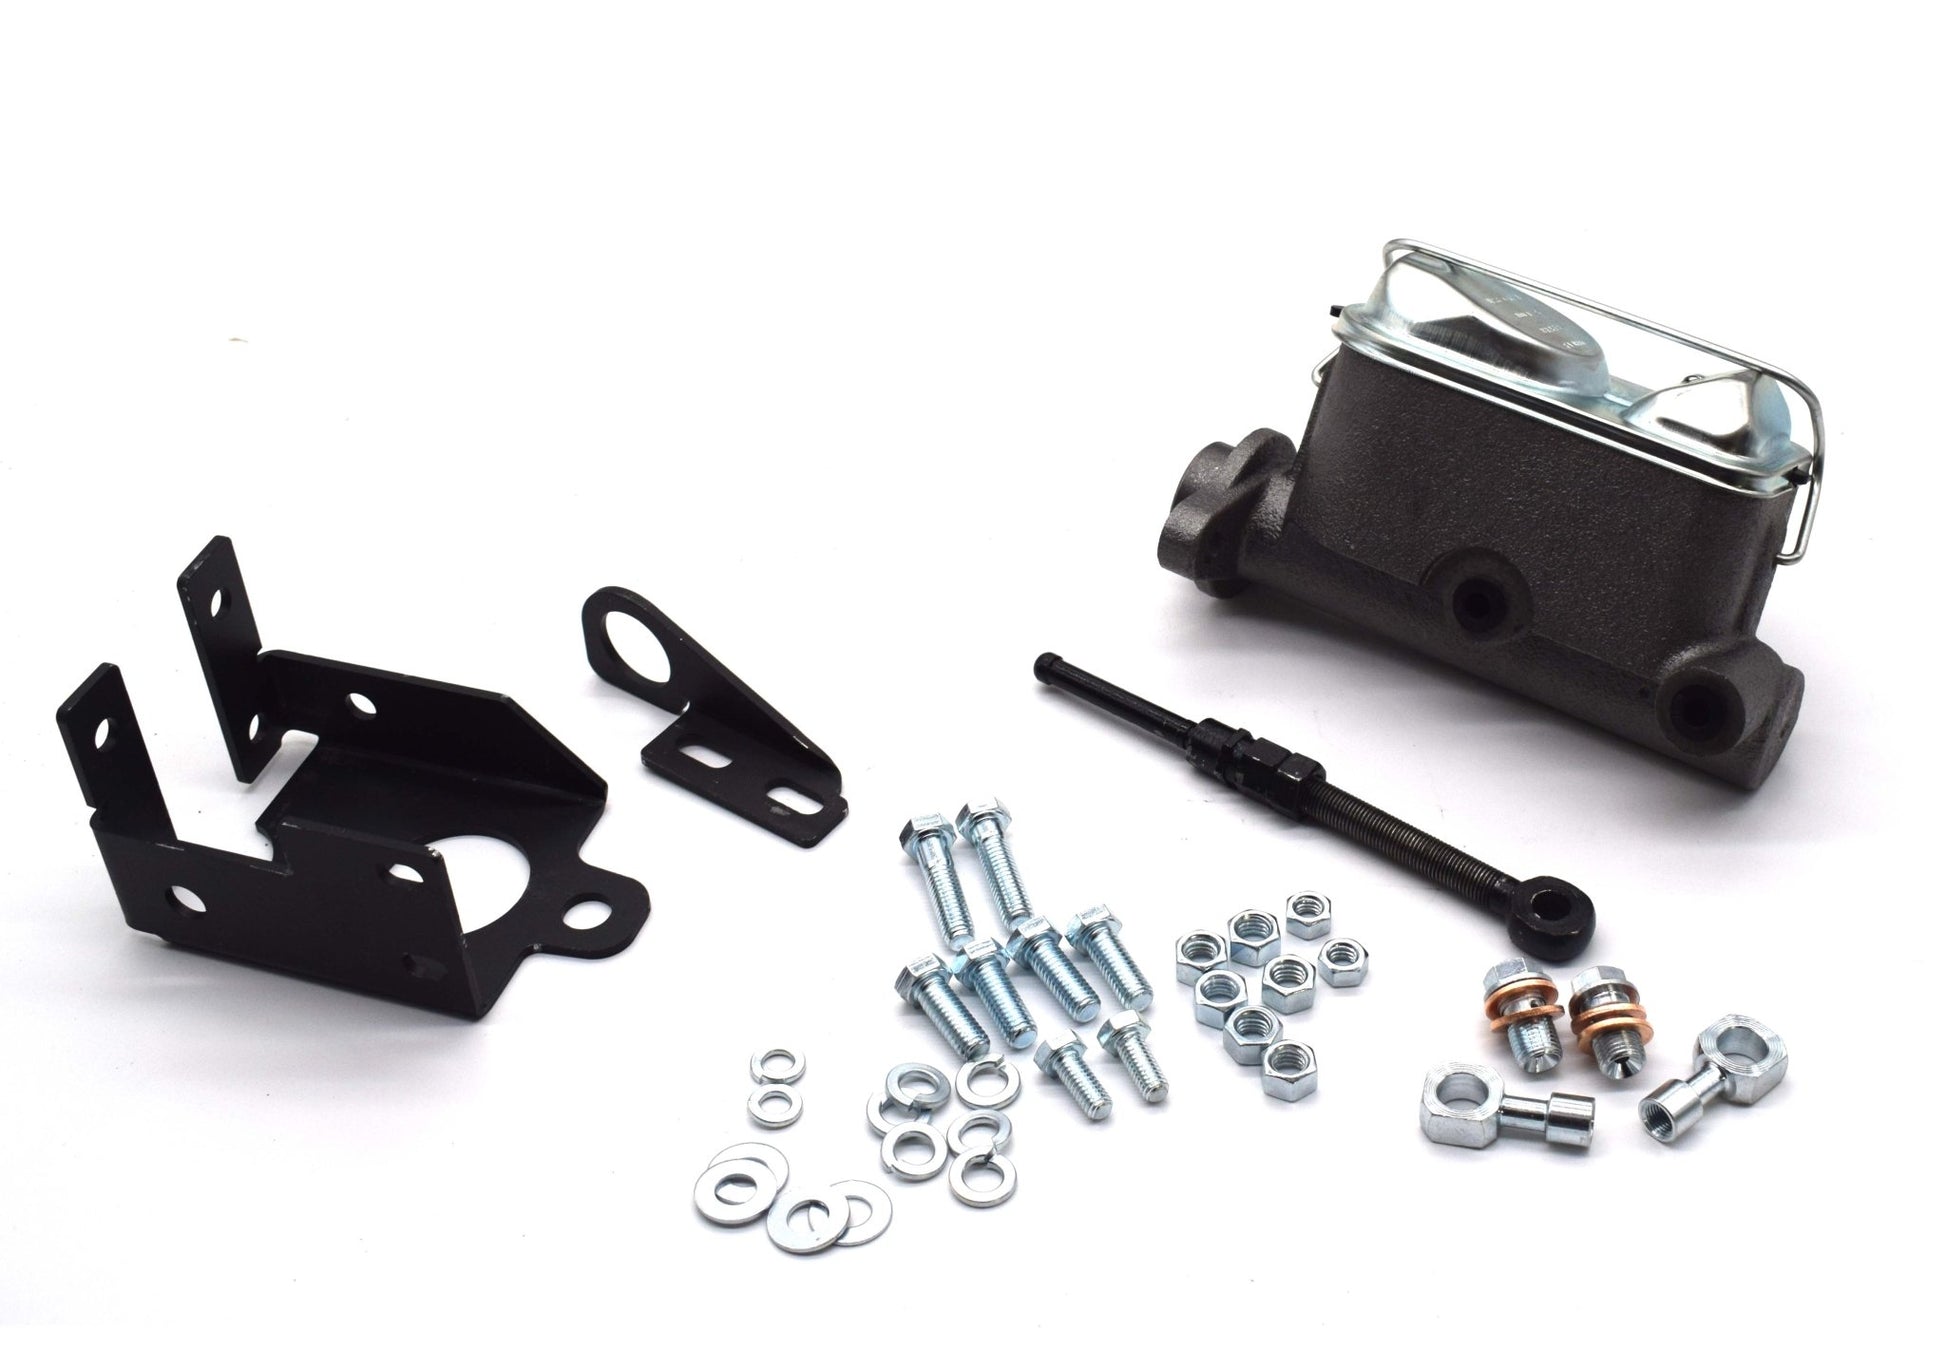 Dual Master Cylinder Conversion, Disc/Drum Premium Kit, 1941-1971 Willys and Jeep - The JeepsterMan